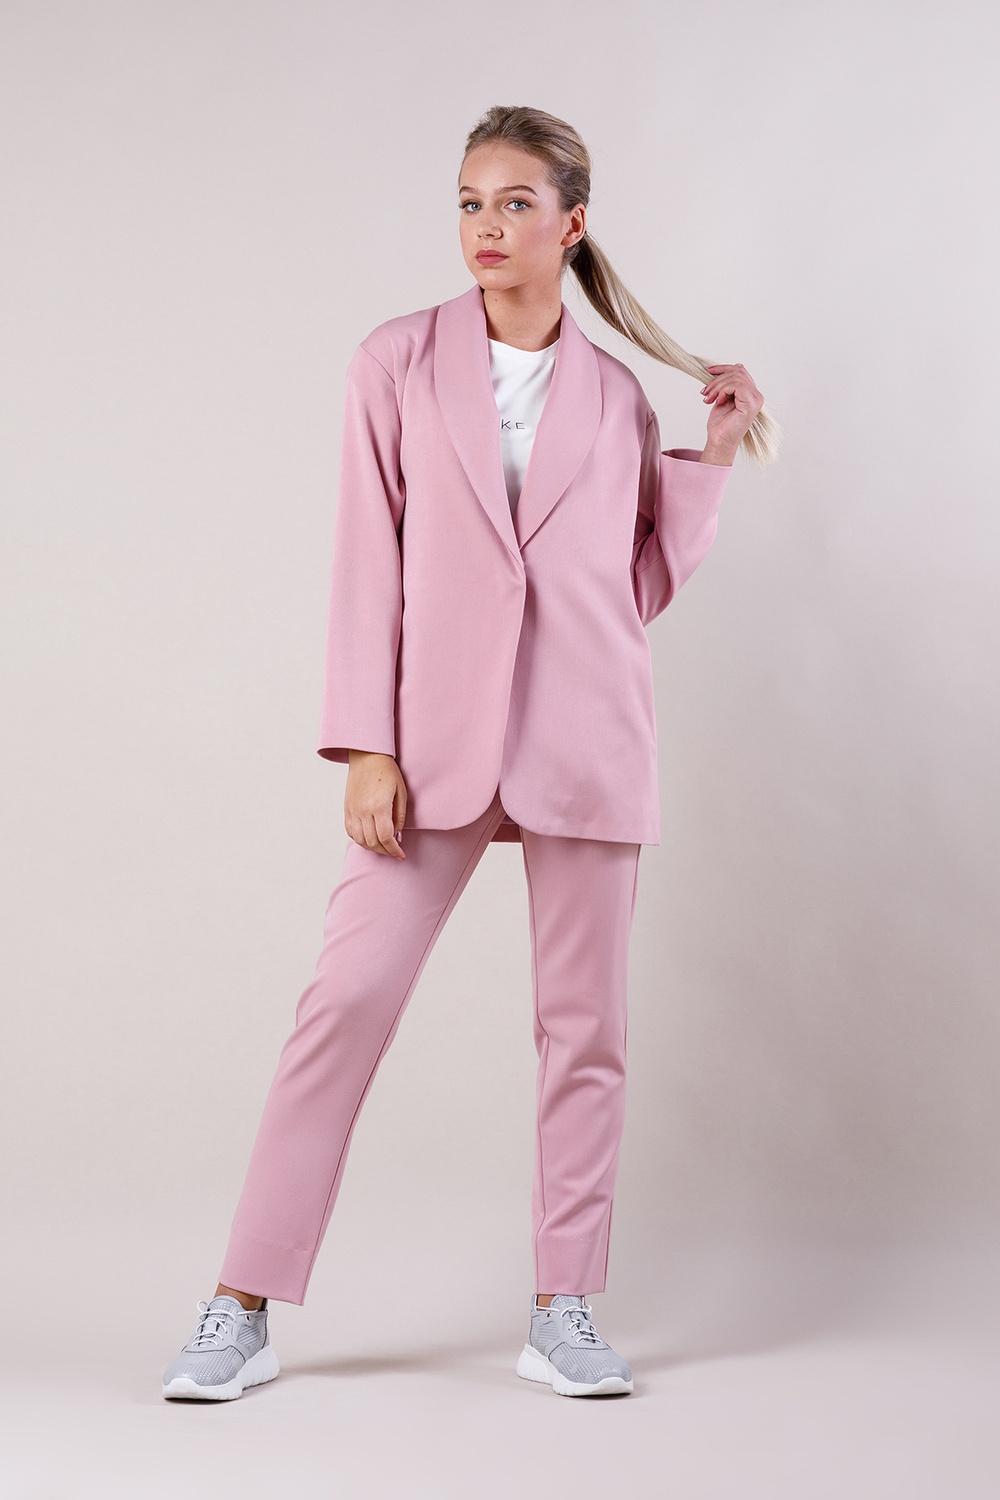 *Padded shoulder suit with shawl collar